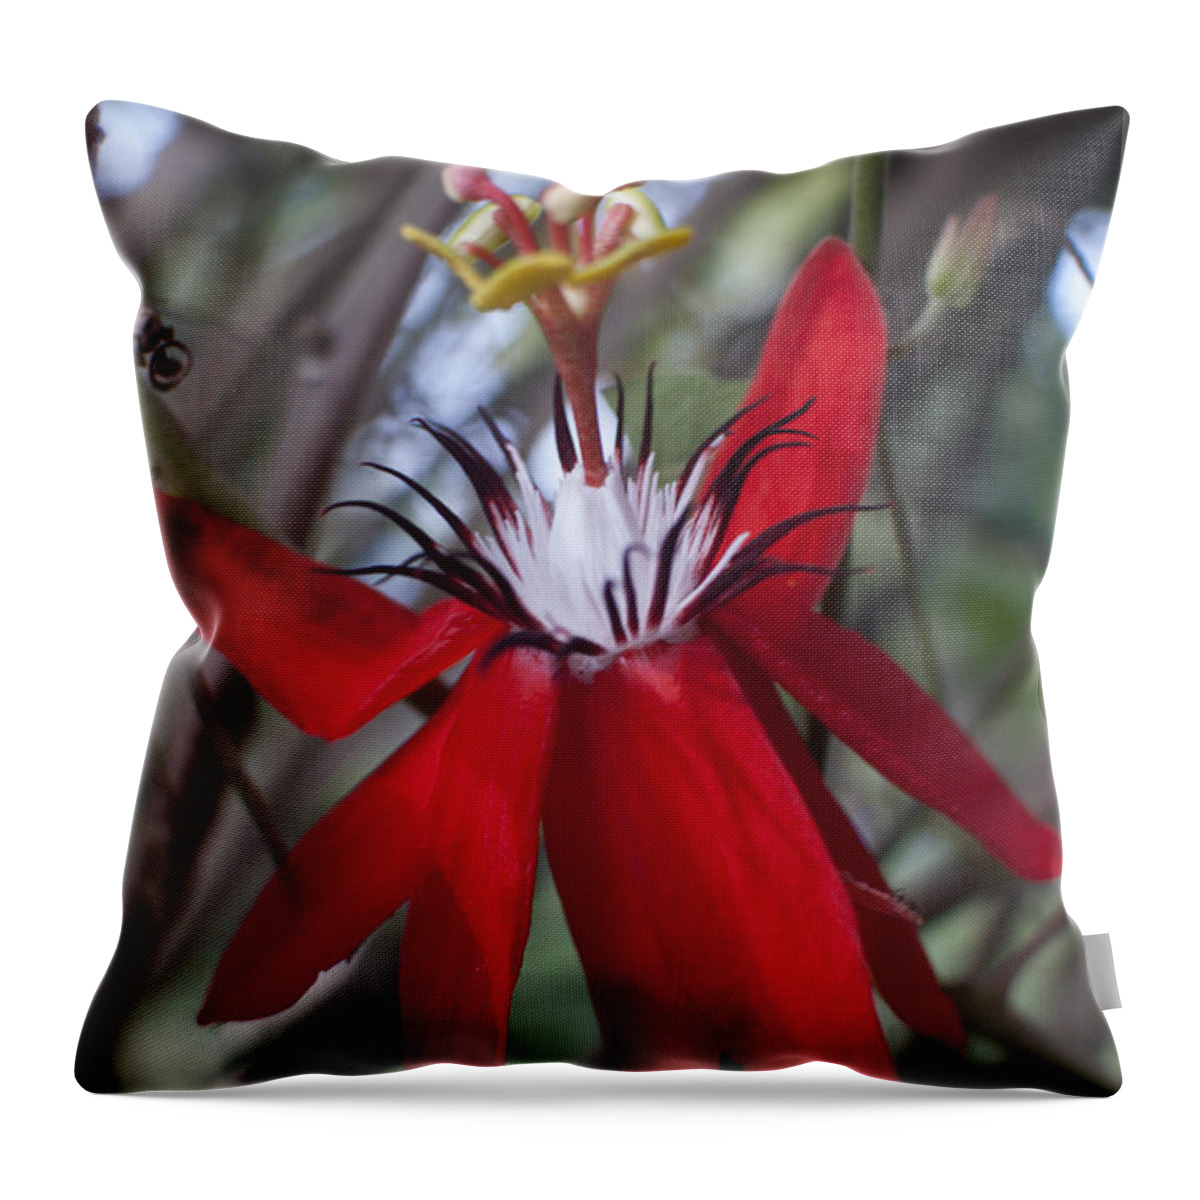 Flowers Throw Pillow featuring the photograph Java Paradise by Miguel Winterpacht